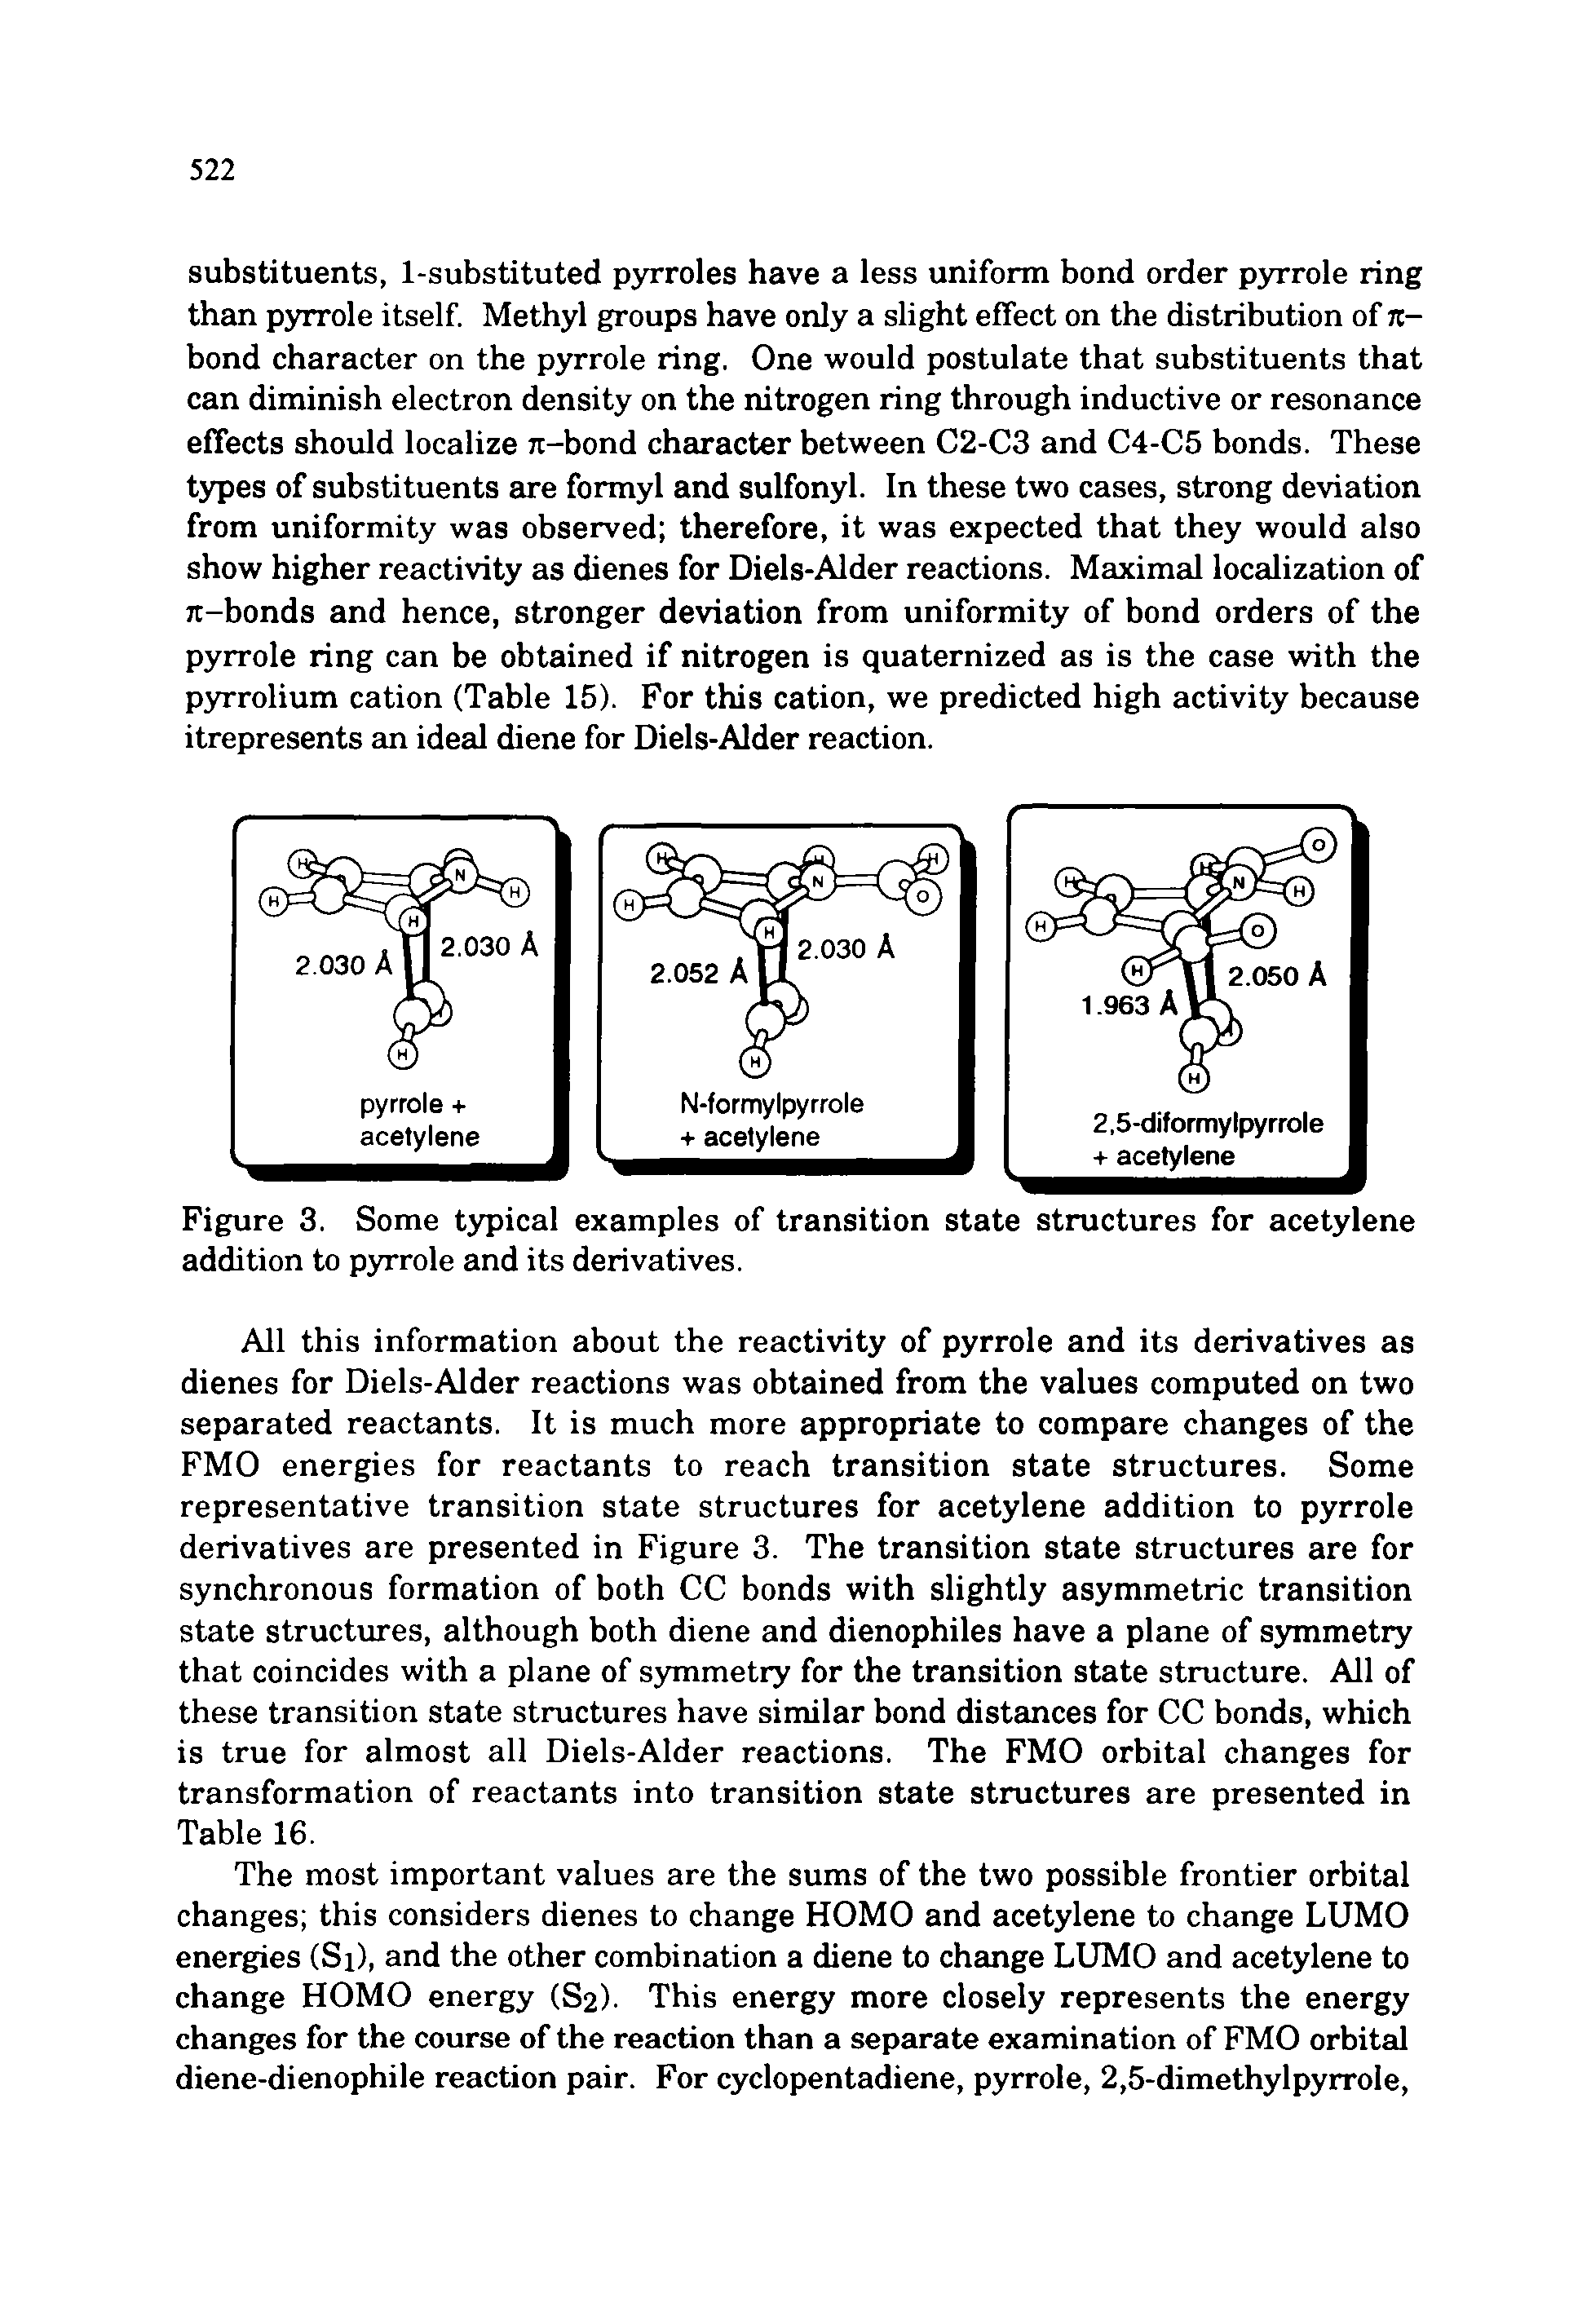 Figure 3. Some typical examples of transition state structures for acetylene addition to pyrrole and its derivatives.